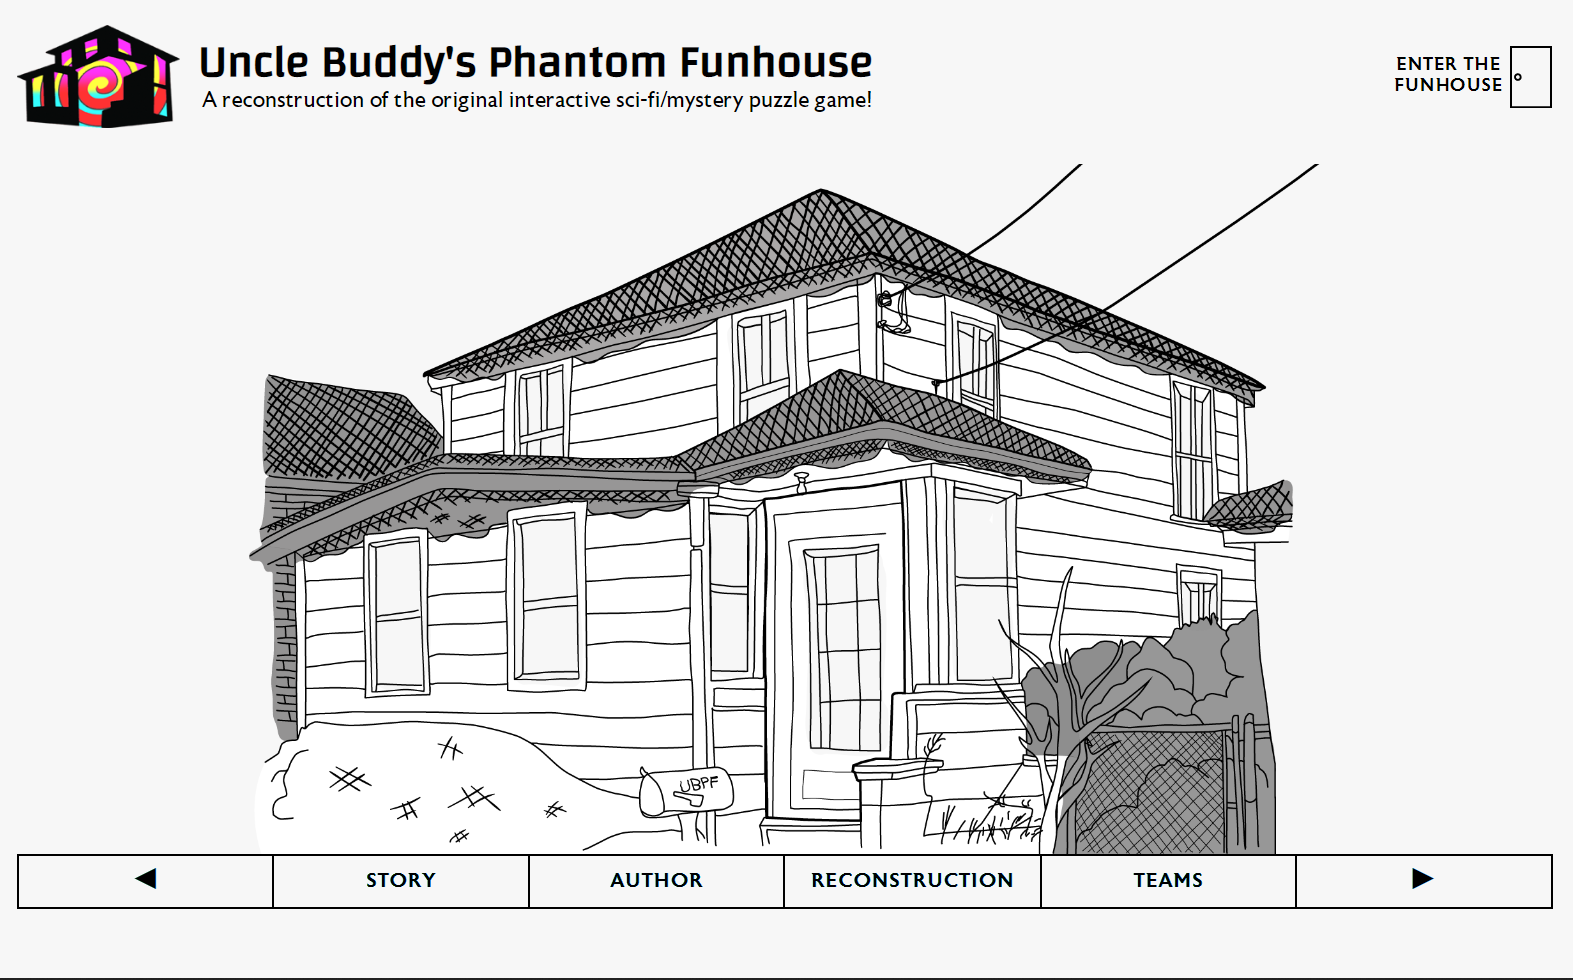 screenshot of the archival site for Uncle Buddy's Phantom Funhouse